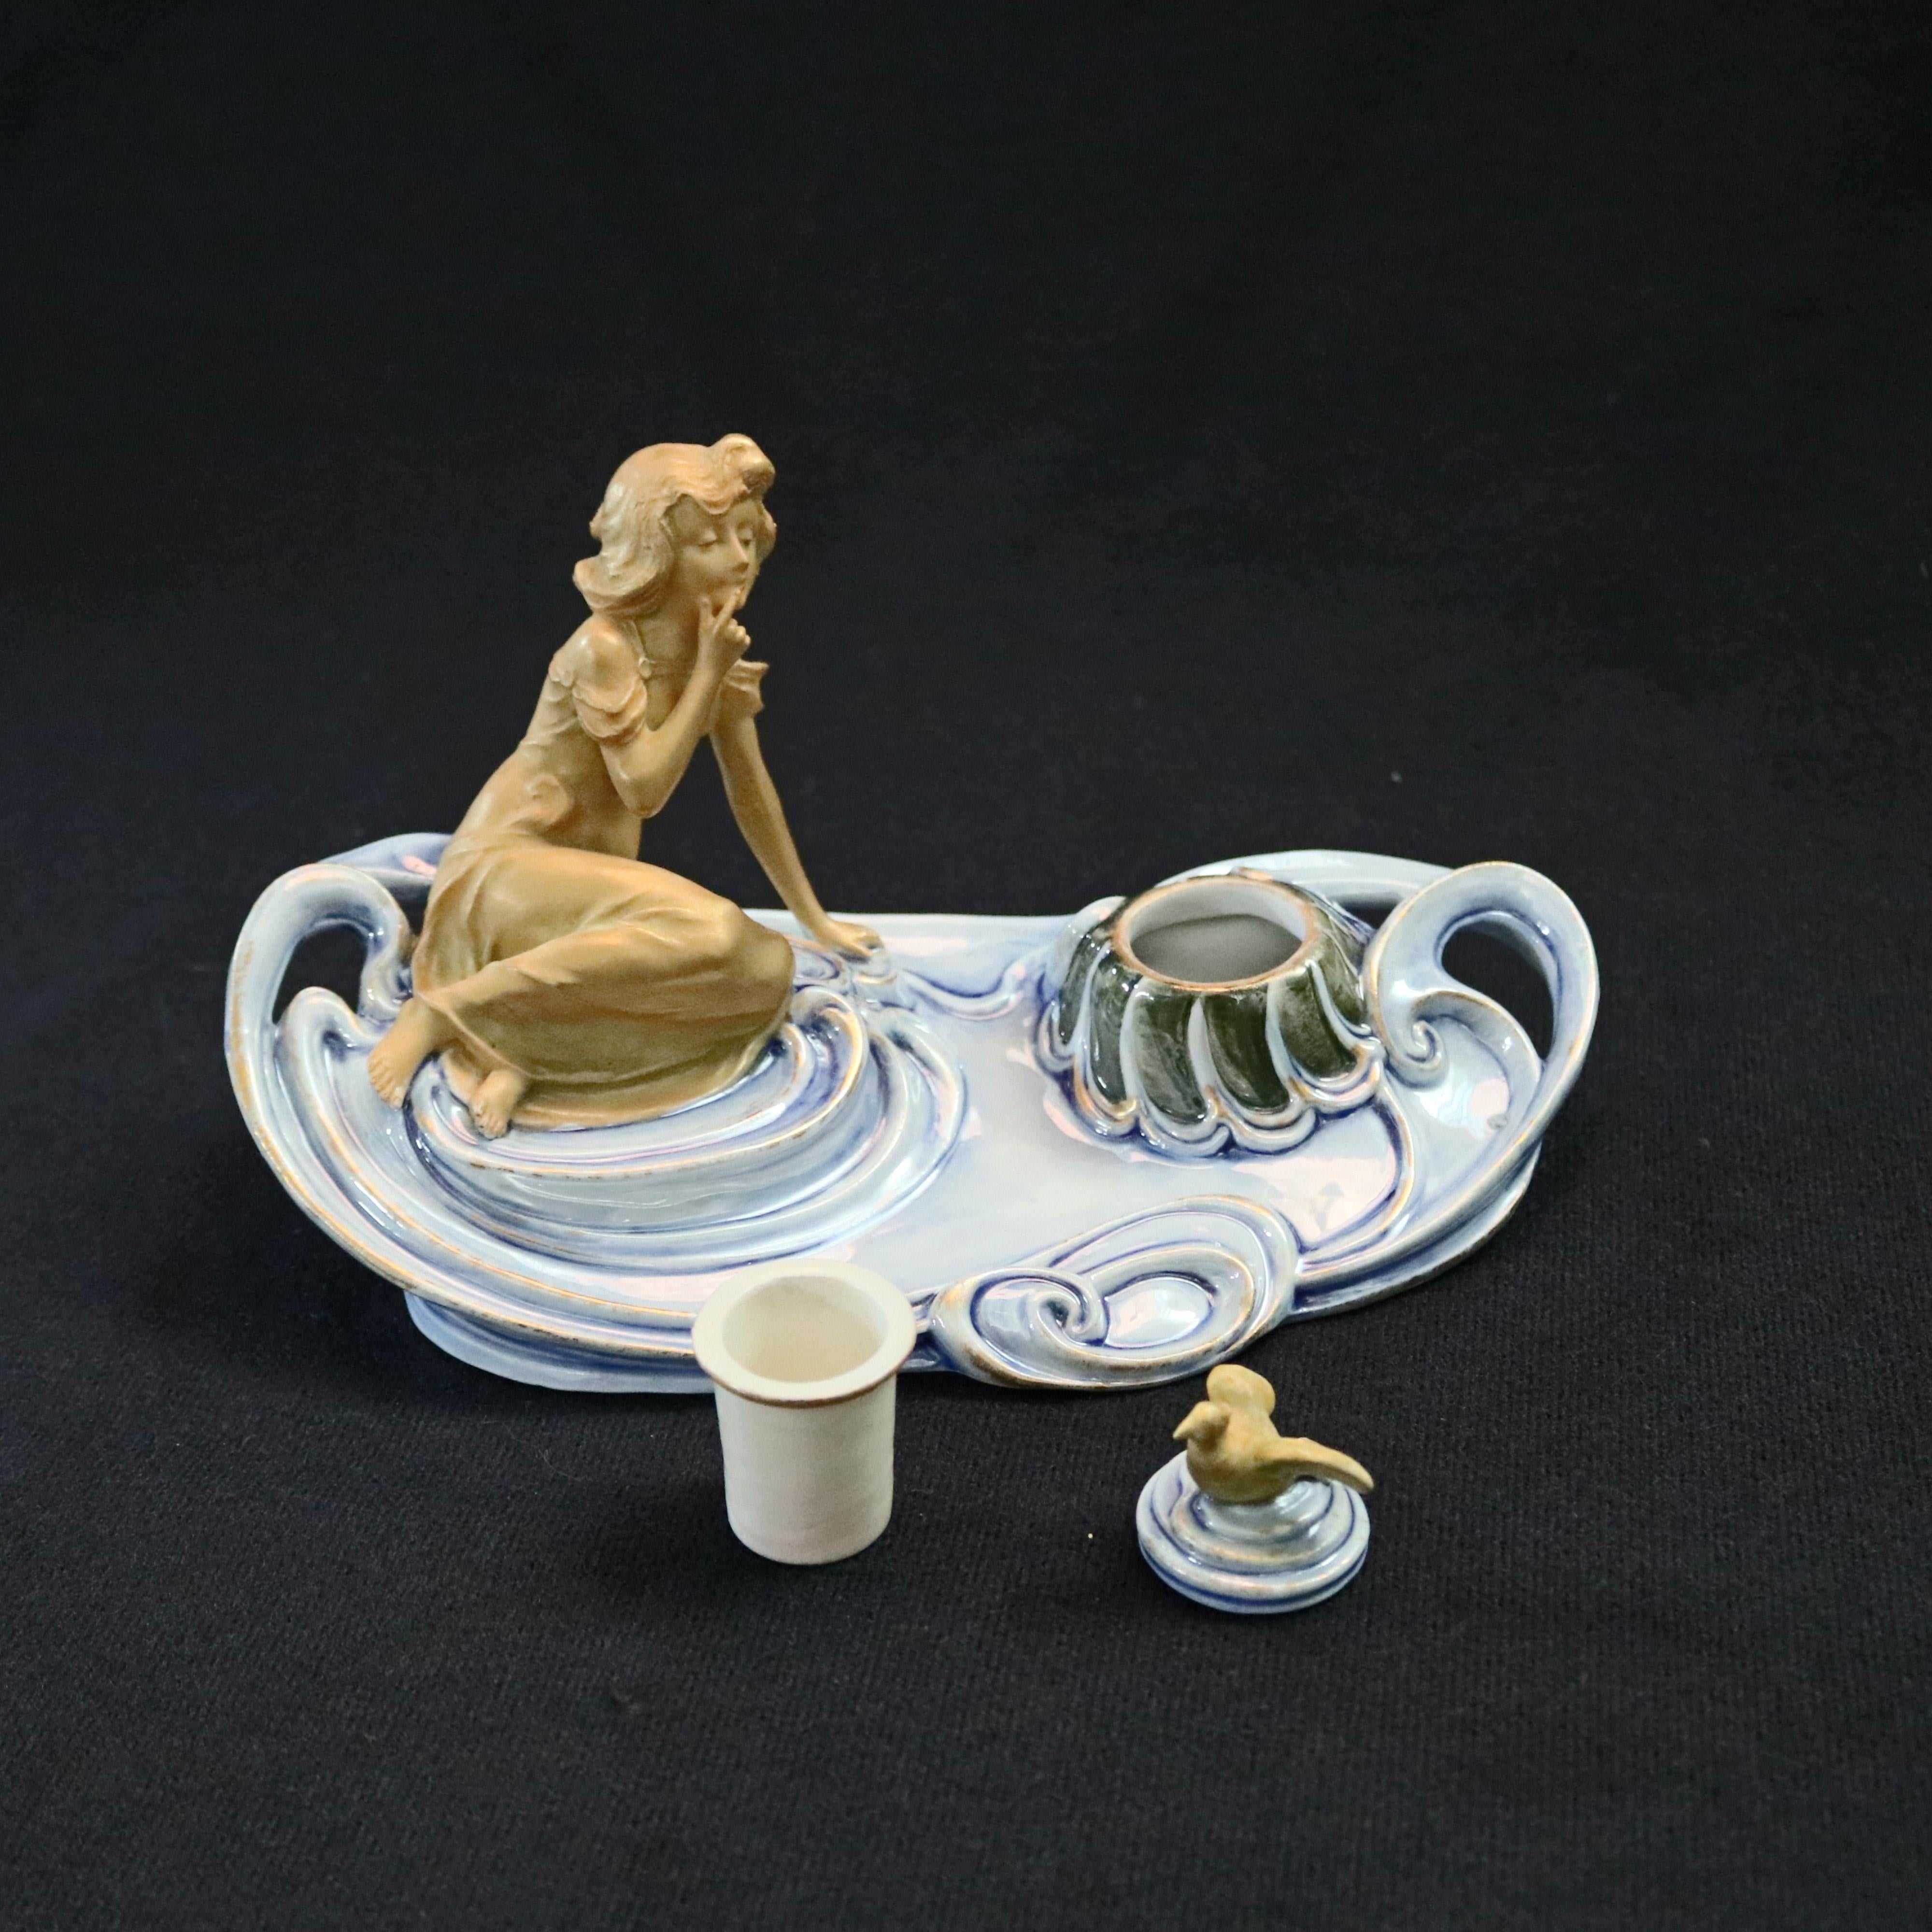 An antique Austrian Art Nouveau figural amphora porcelain inkwell offers grouping of young woman seated on water form tray with lidded inkwell having bird form finial, Turn Wein Crown Mark stamped on base, circa 1920

Measures - 4.5